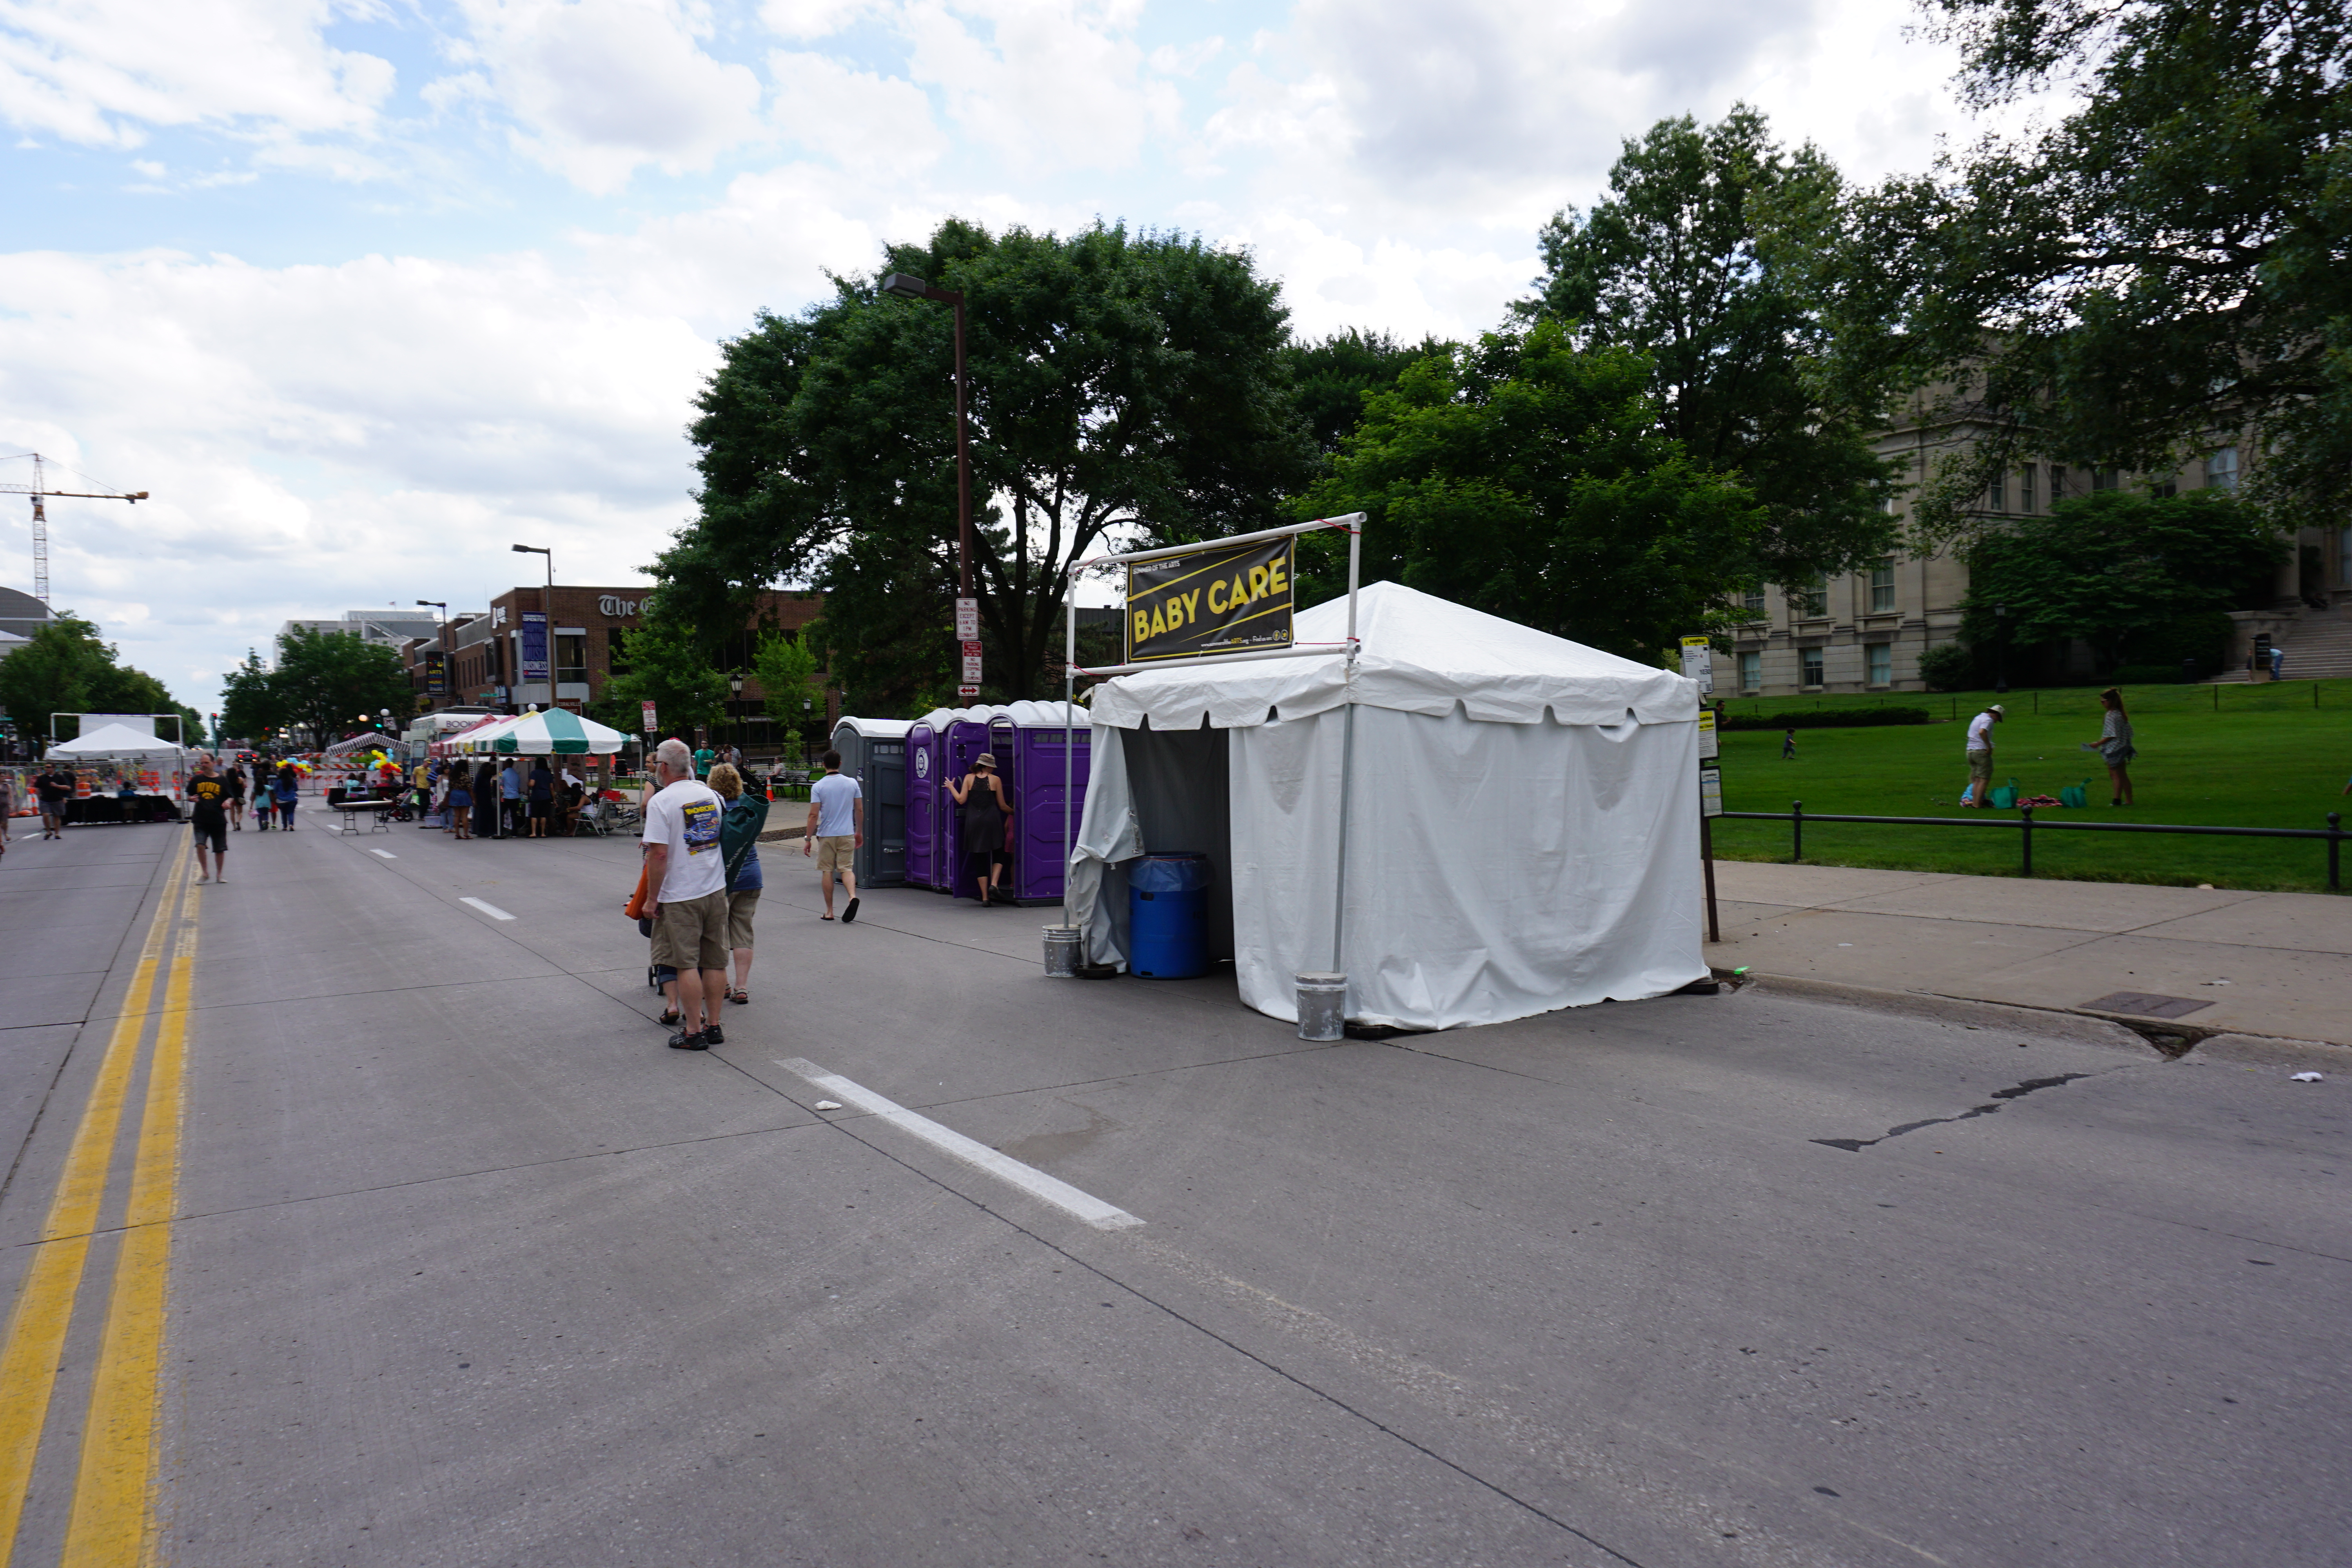 Pictures from the 2016 Iowa Arts Festival - Baby Care tent